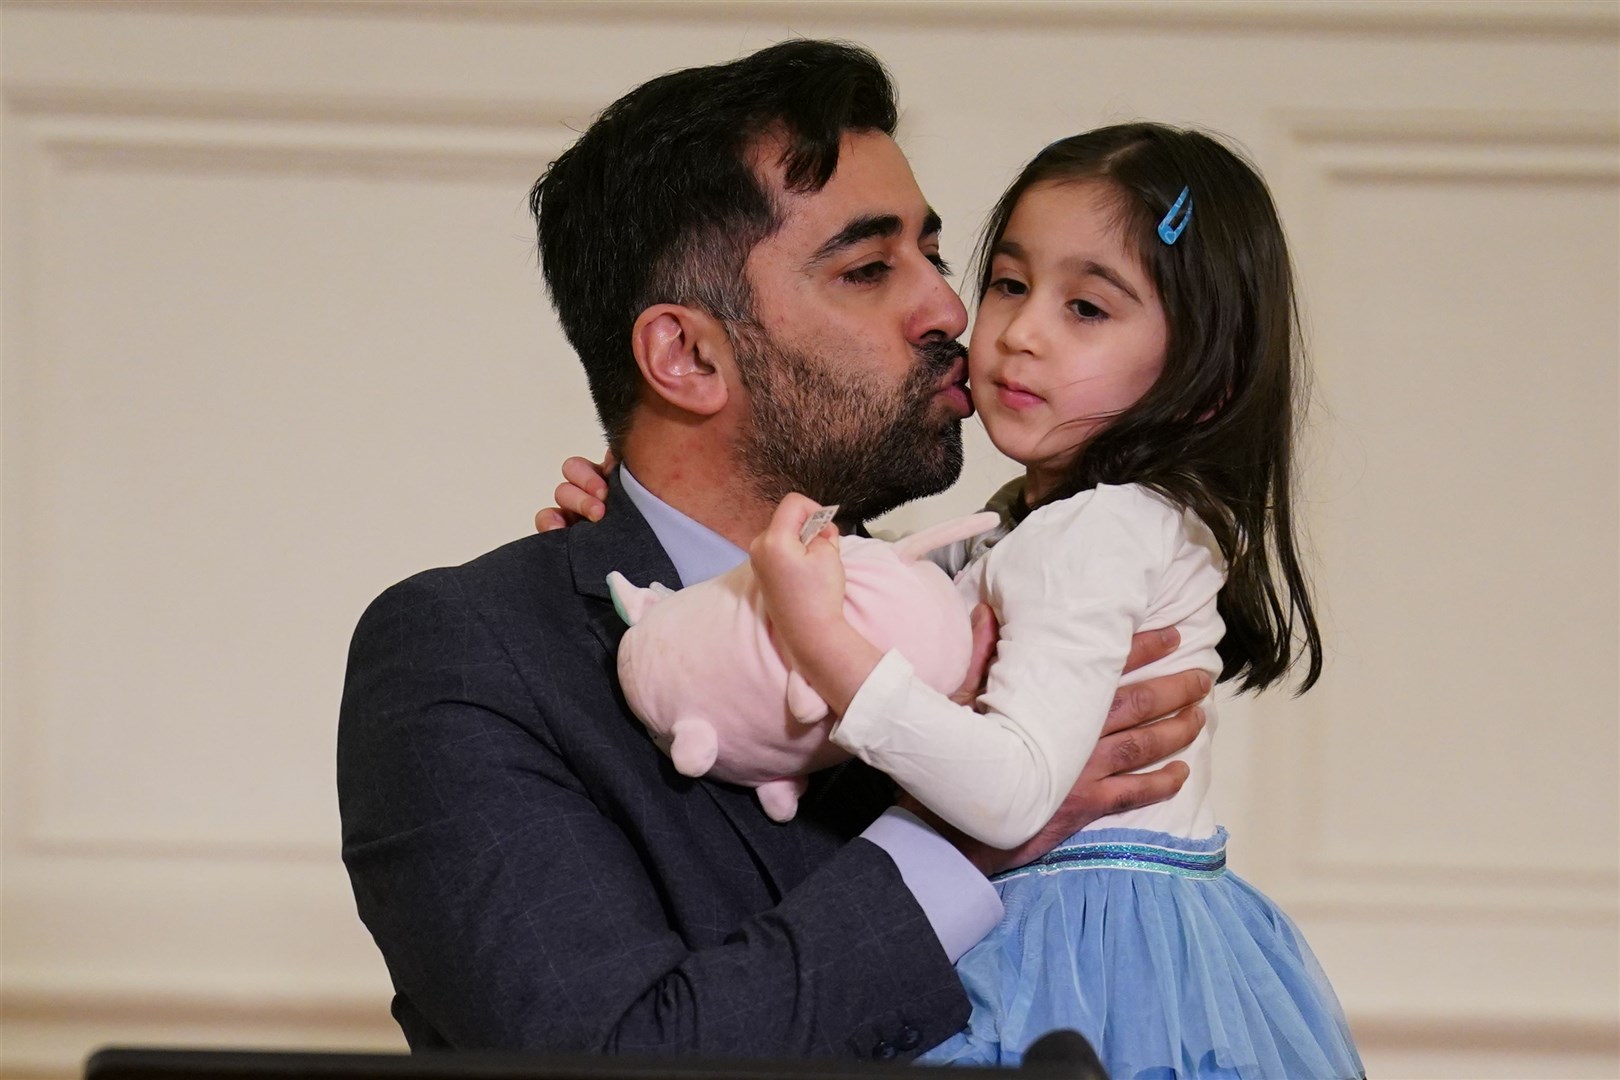 Humza Yousaf, with his daughter Amal, at the launch of his campaign at Clydebank Town Hall (Andrew Milligan/PA)